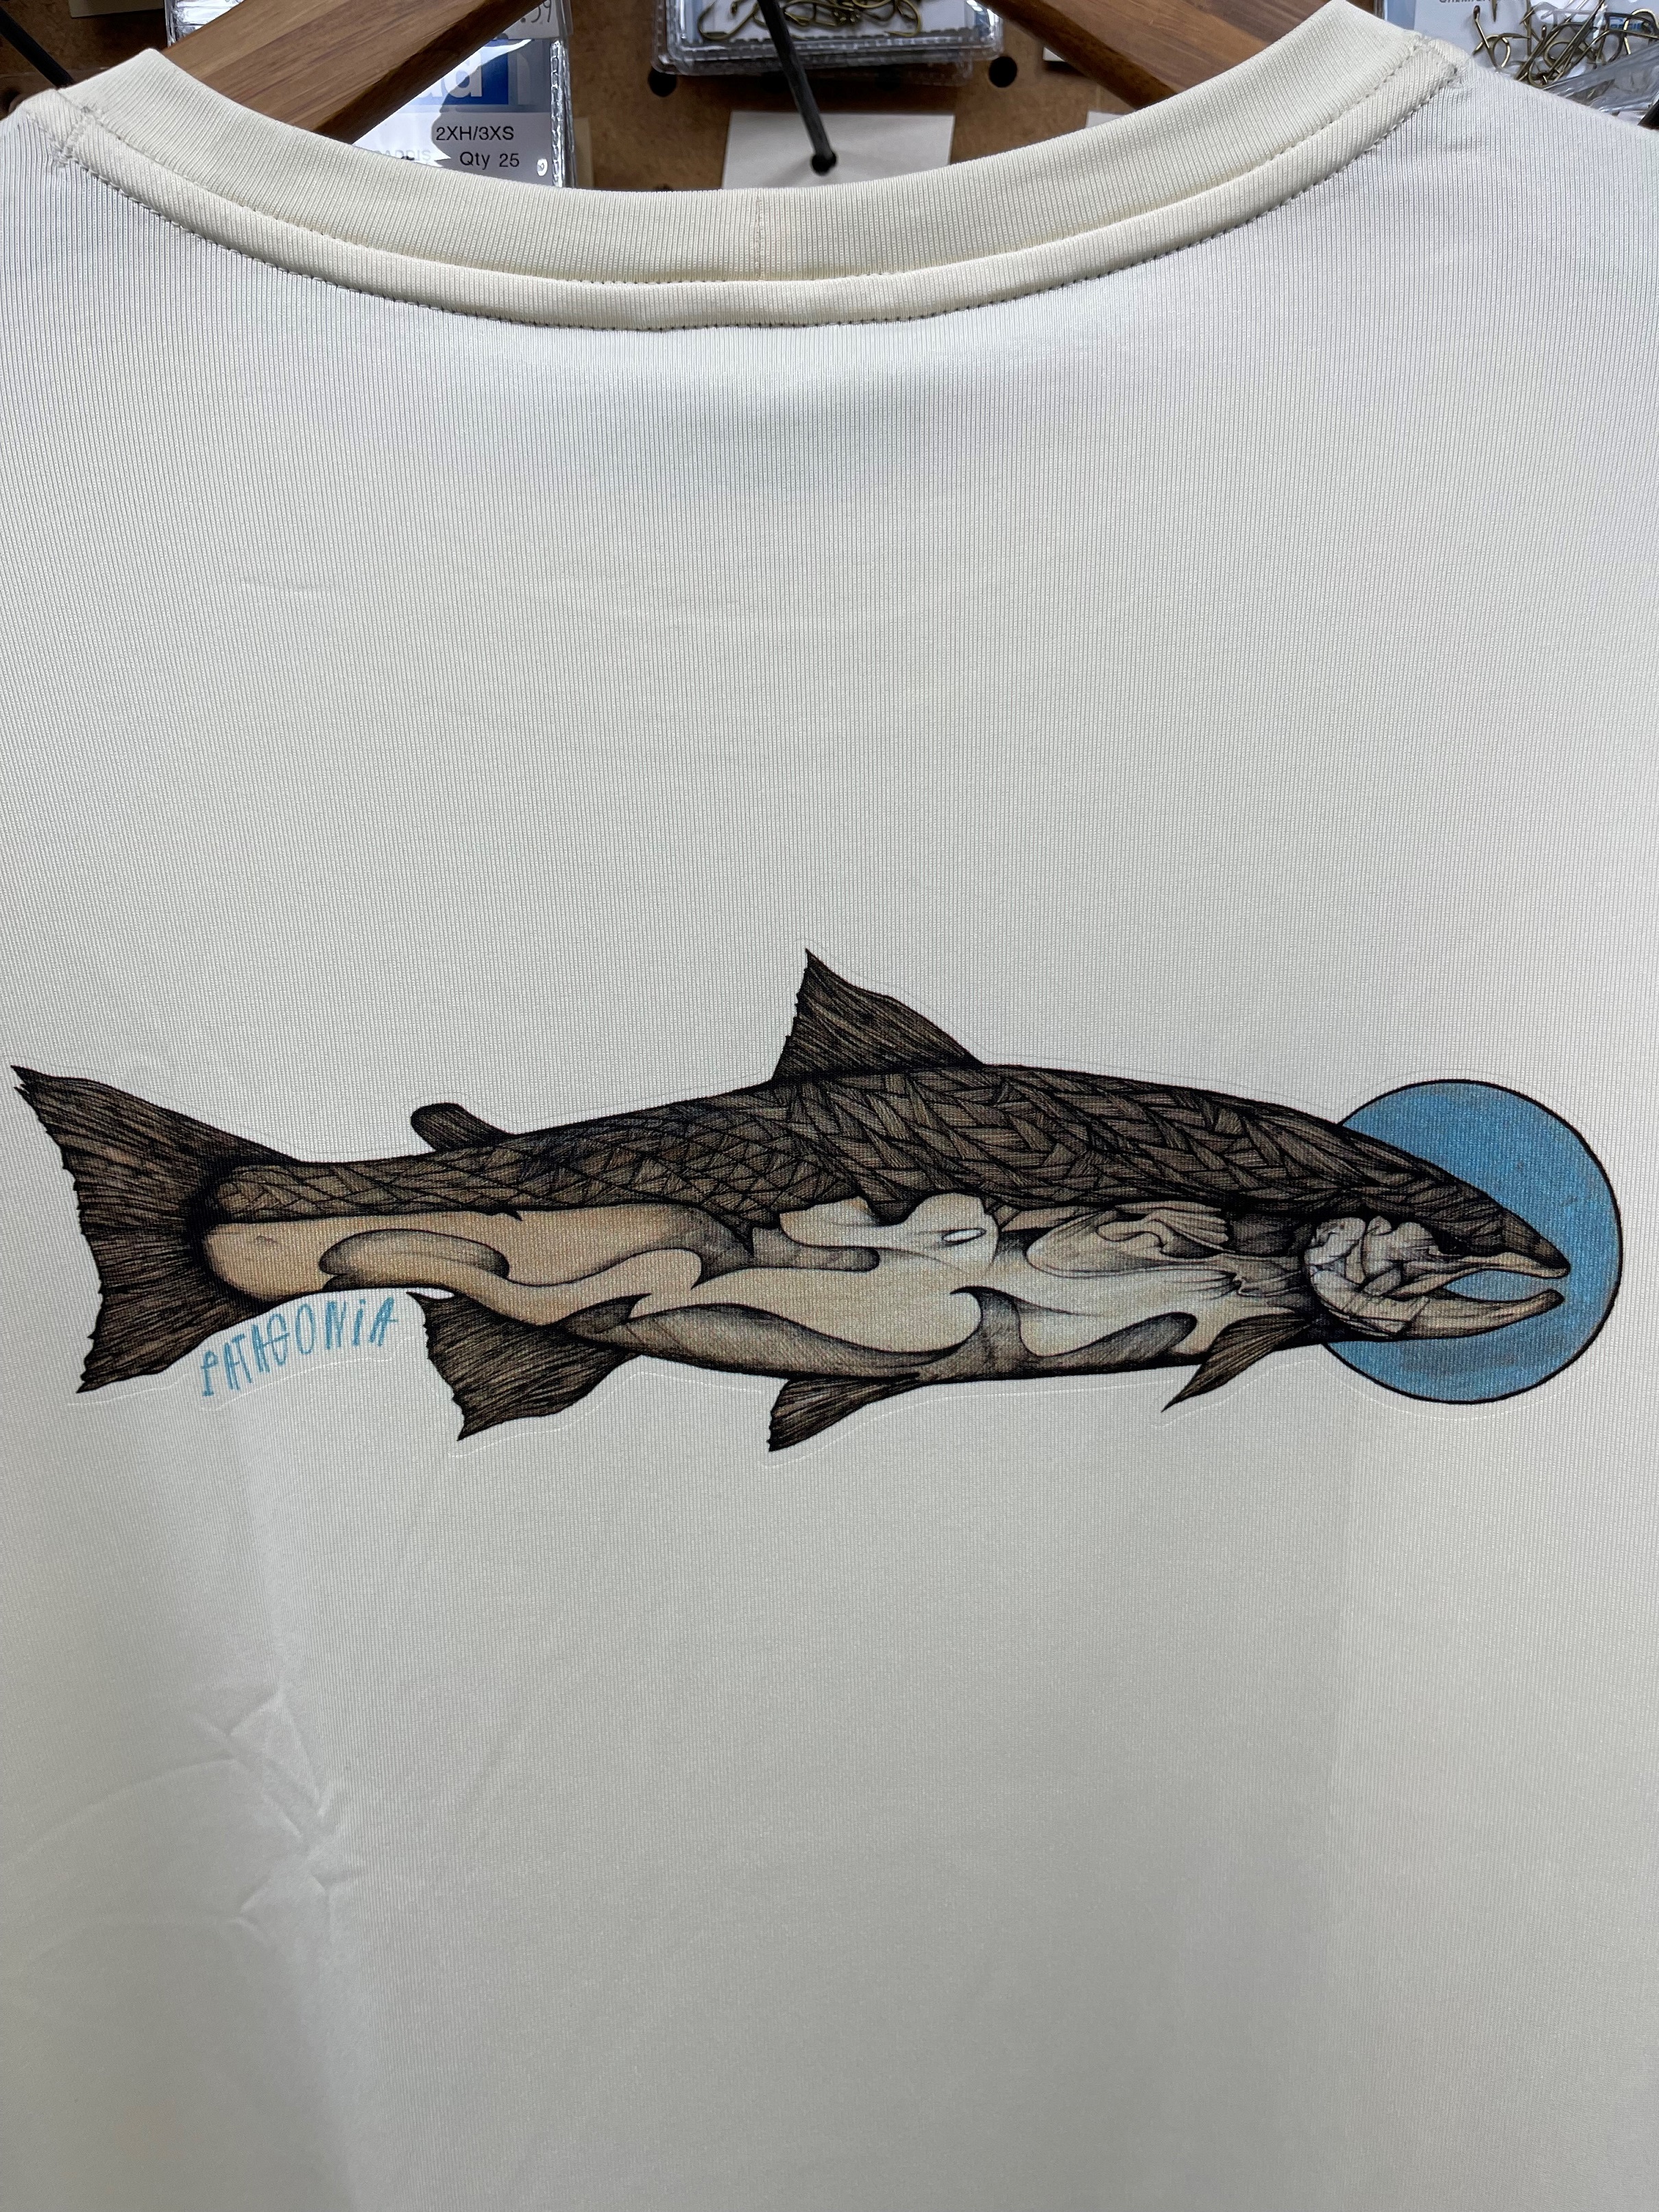 Patagonia M's Graphic Tech Fish Tee - Moon Fish: Toasted White - XL